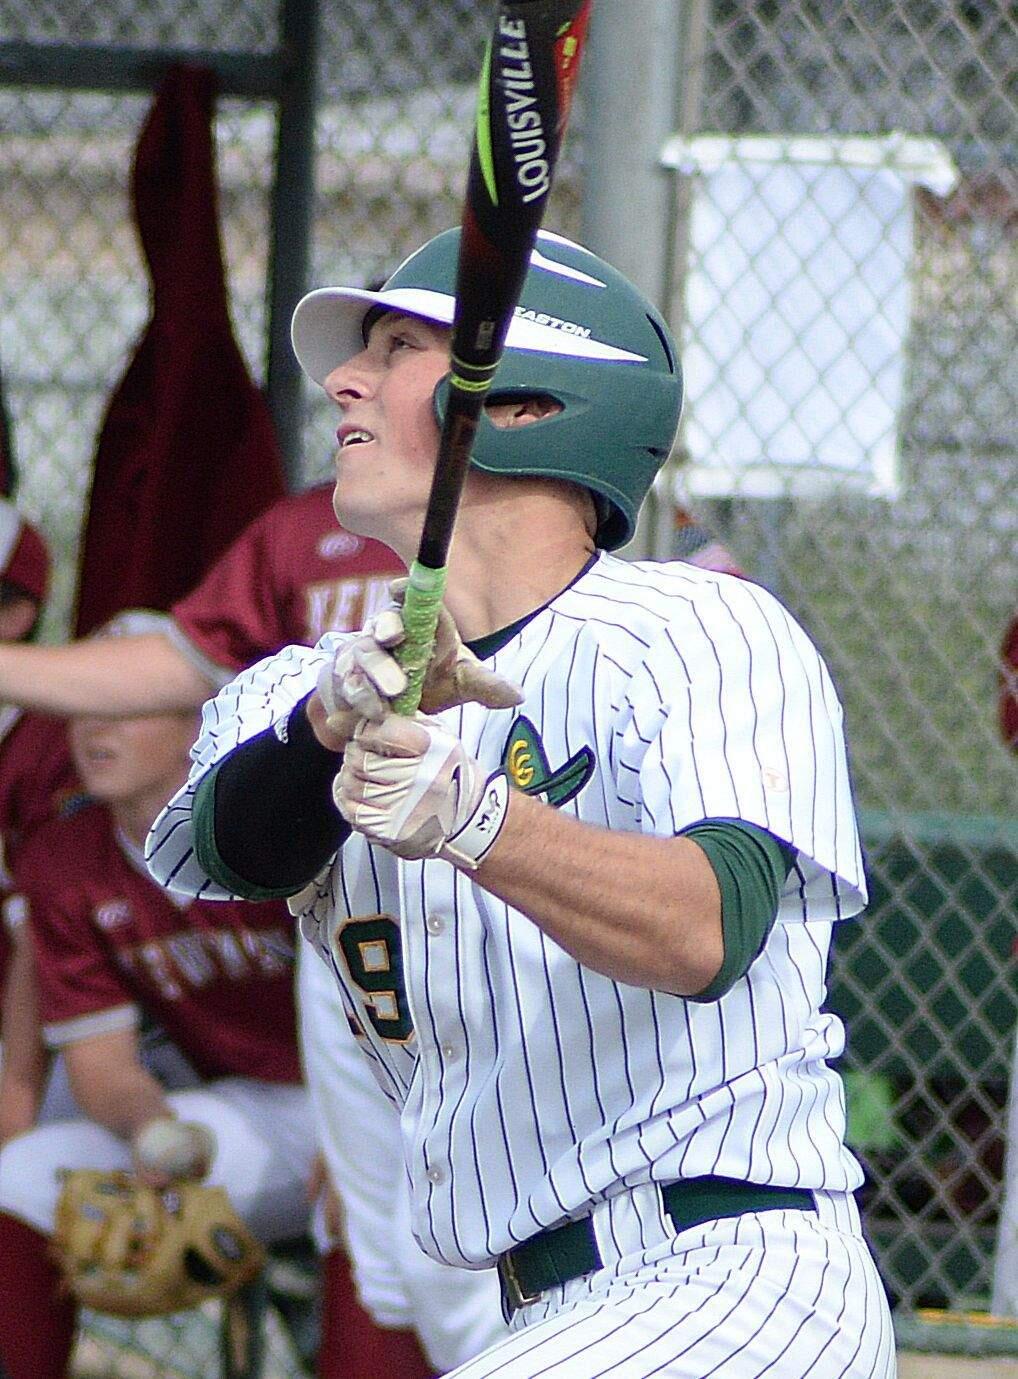 SUMNER FOWLER/FOR THE ARGUS COURIERAfer tying for the Cape Cod League home run lead, former Casa Grande player Spencer Torkelson is off to play for the USA National Collegiate Baseball team.